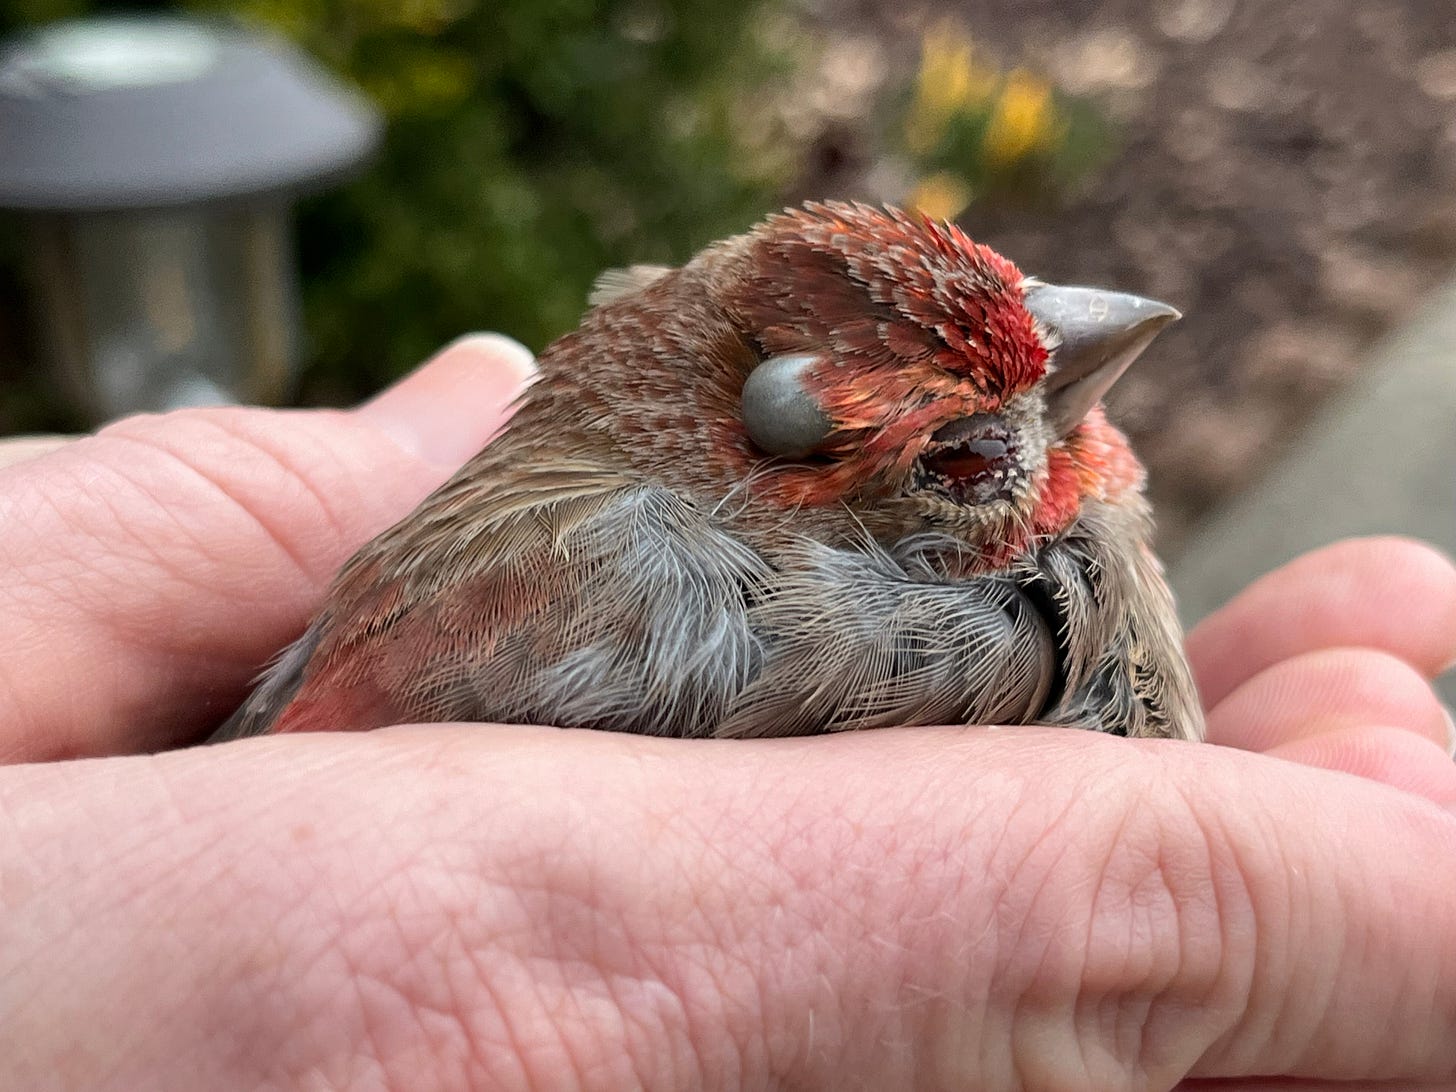 A house finch in my hands with a tick on his head and swollen eye